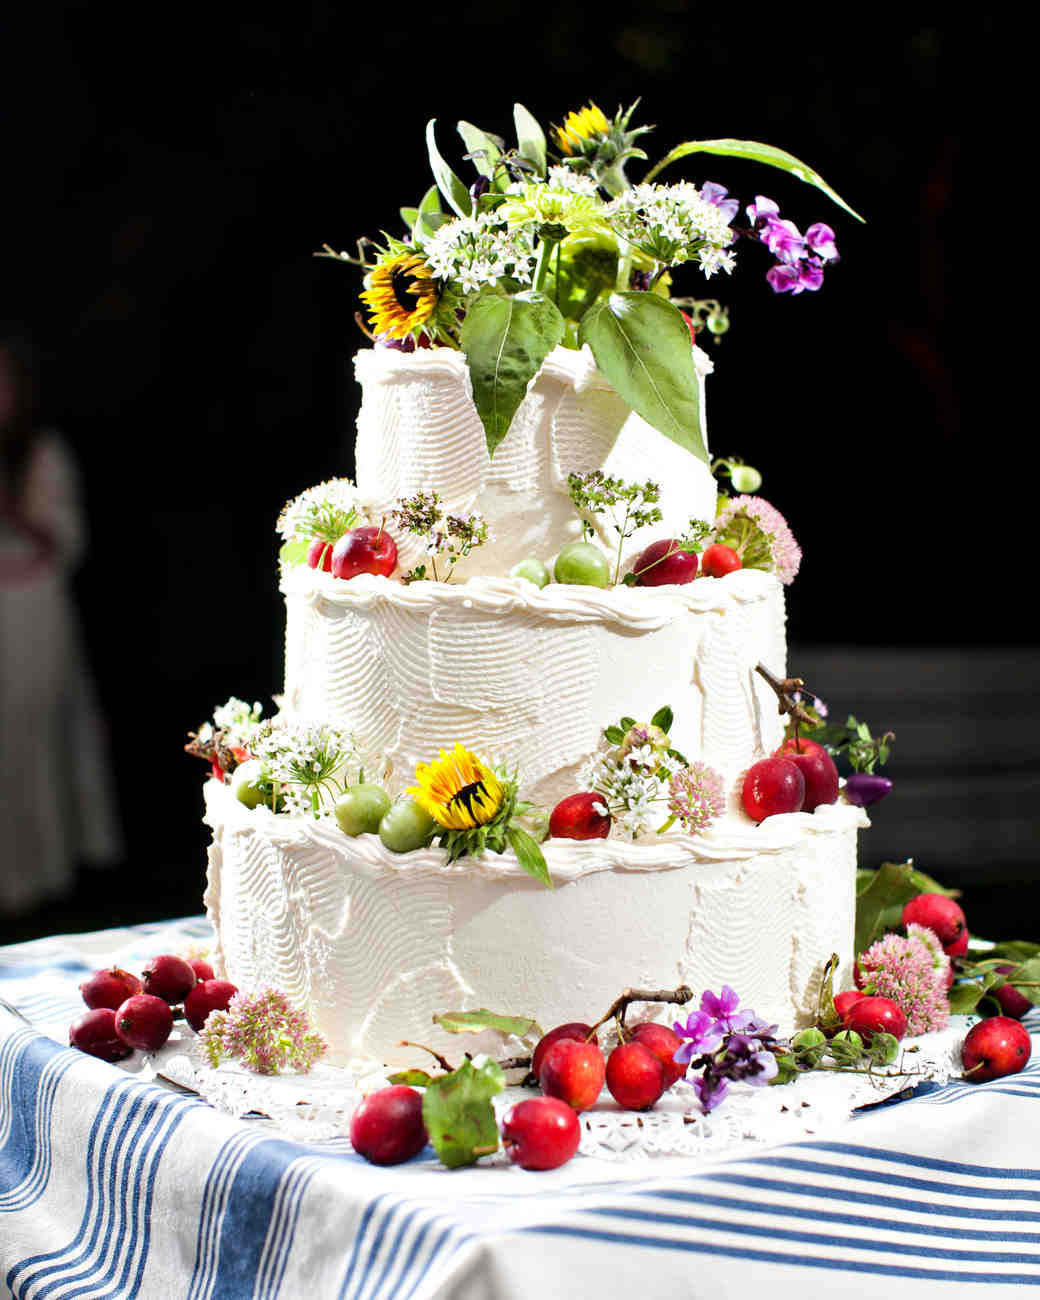 Awesome Wedding Cakes
 32 Amazing Wedding Cakes You Have to See to Believe